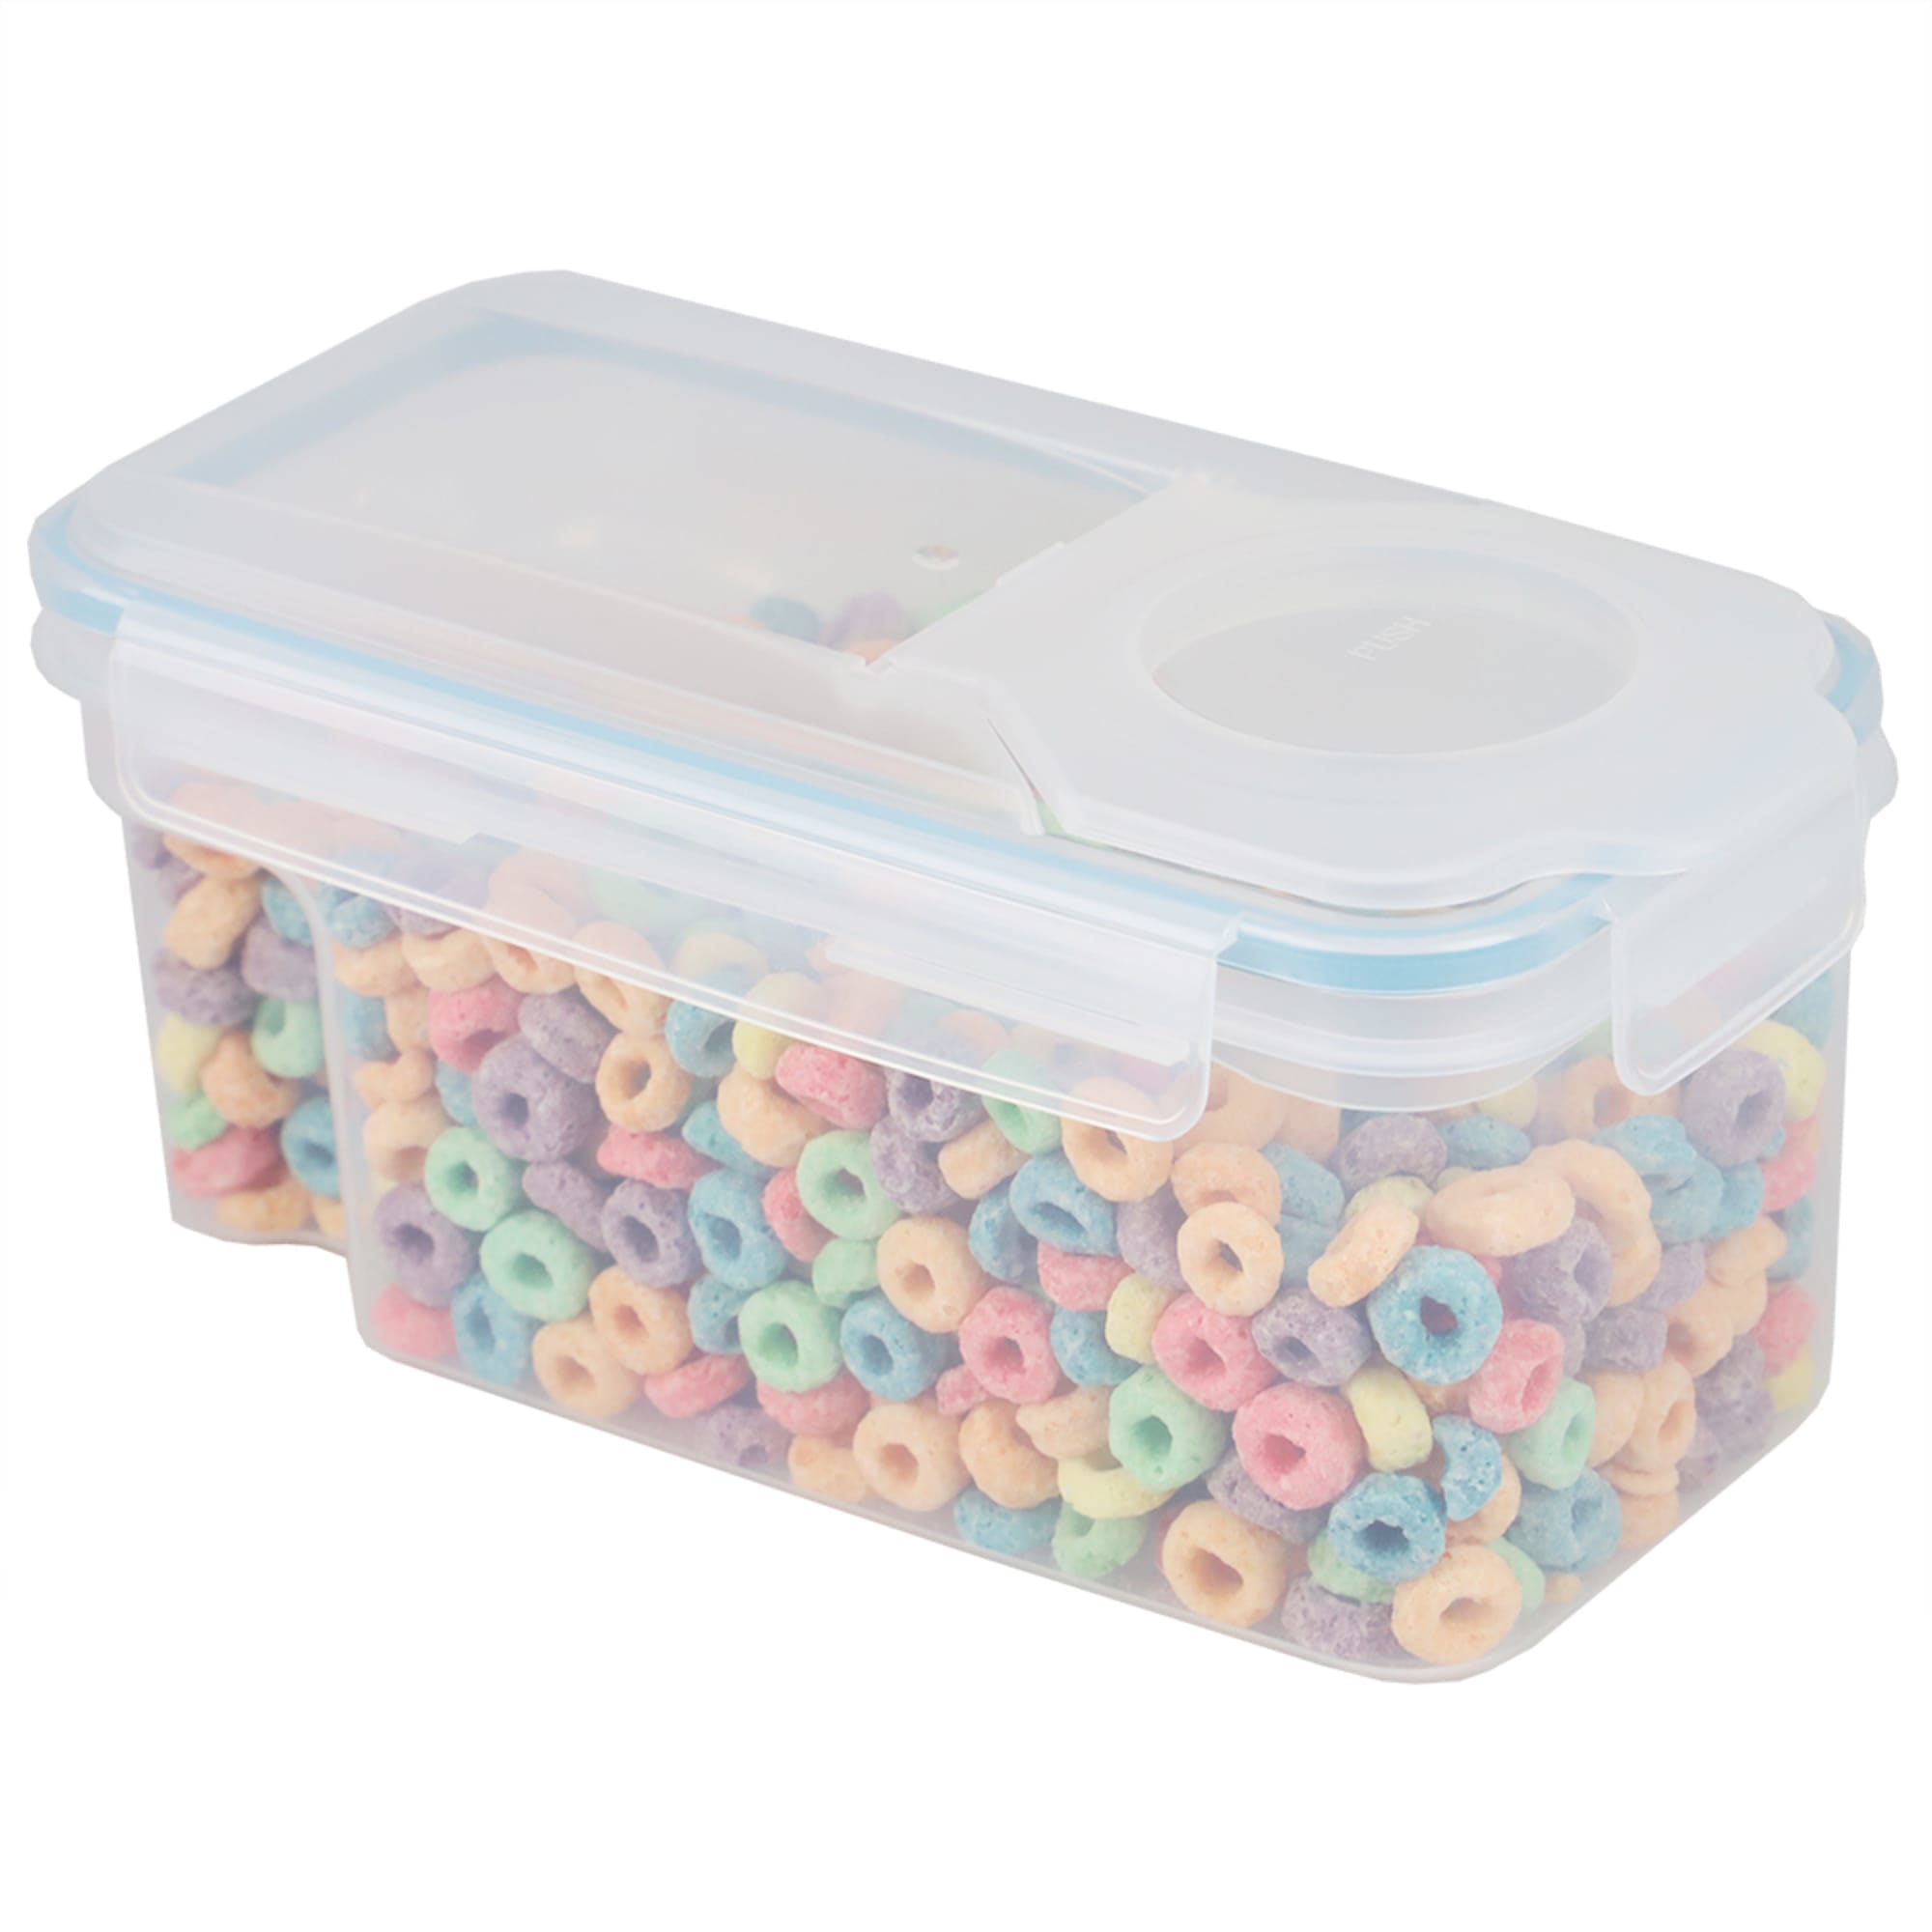 Home Basics Small Plastic Cereal Dispenser with Pour Spout, Clear $4.00 EACH, CASE PACK OF 12